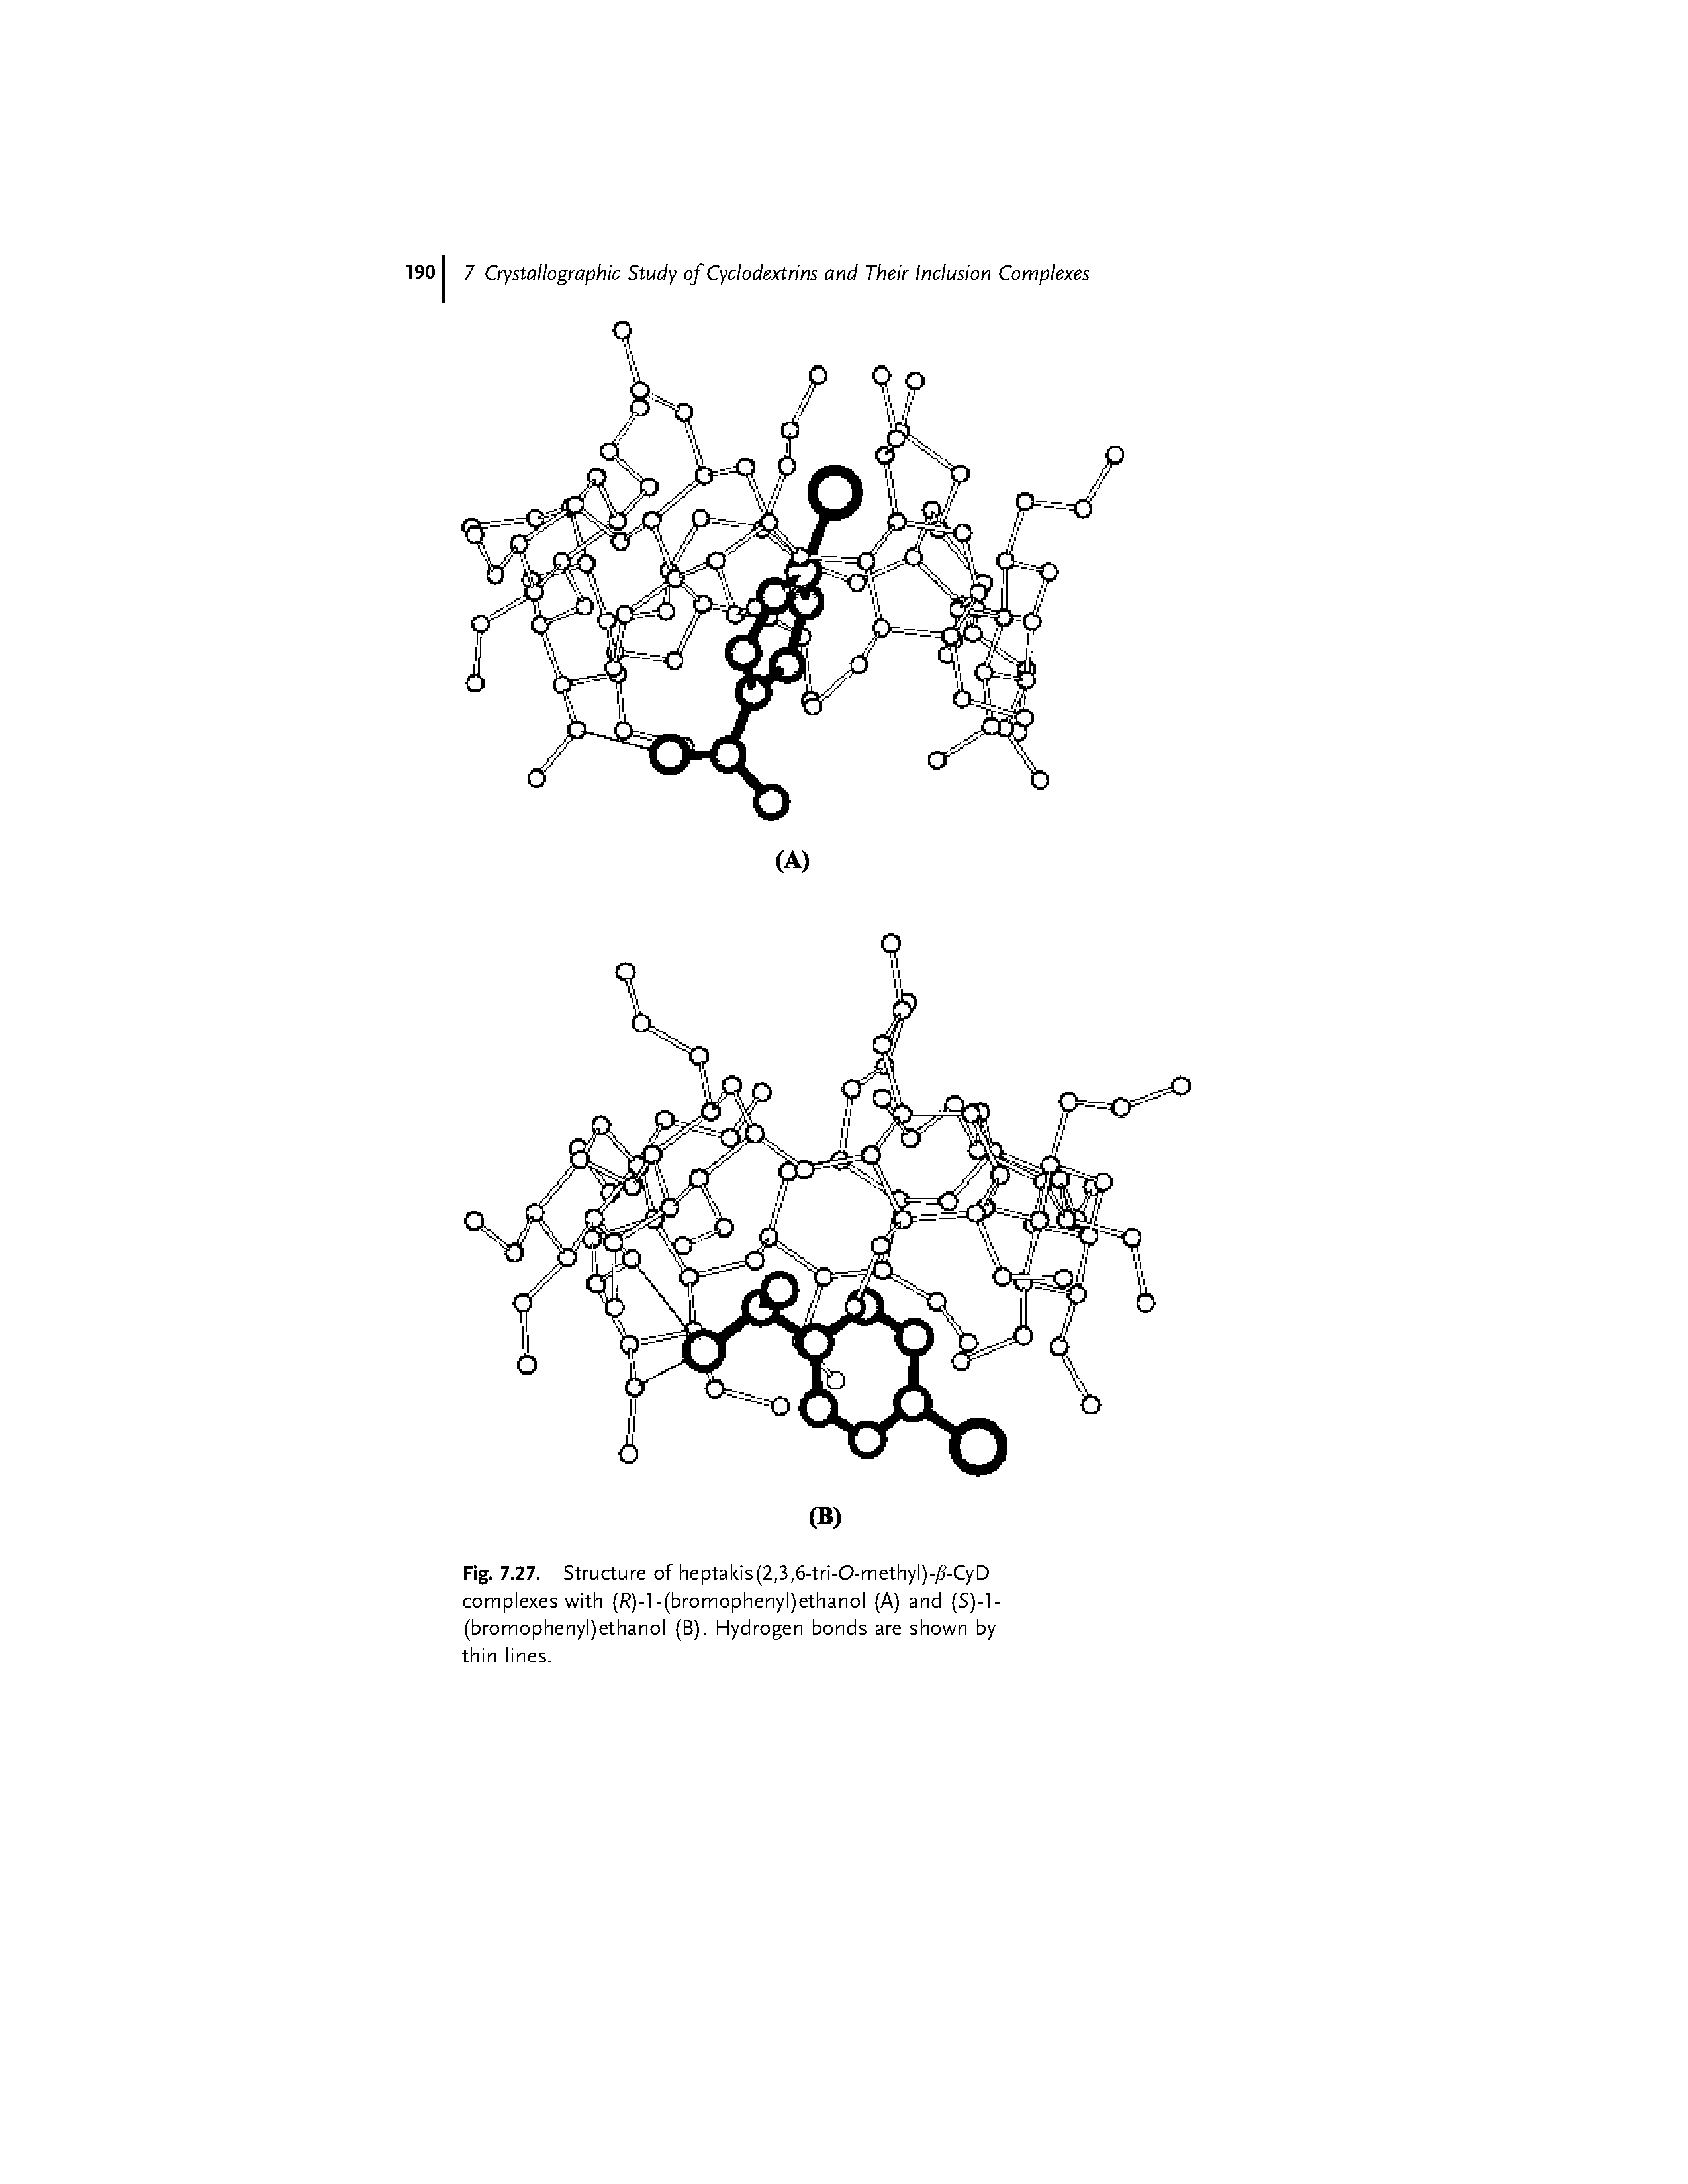 Fig. 7.27. Structure of heptakis(2,3,6-tri-0-methyl)- -CyD complexes with (R)-l-(bromophenyl)ethanol (A) and (S)-l-(bromophenyl)ethanol (B). Hydrogen bonds are shown by thin lines.